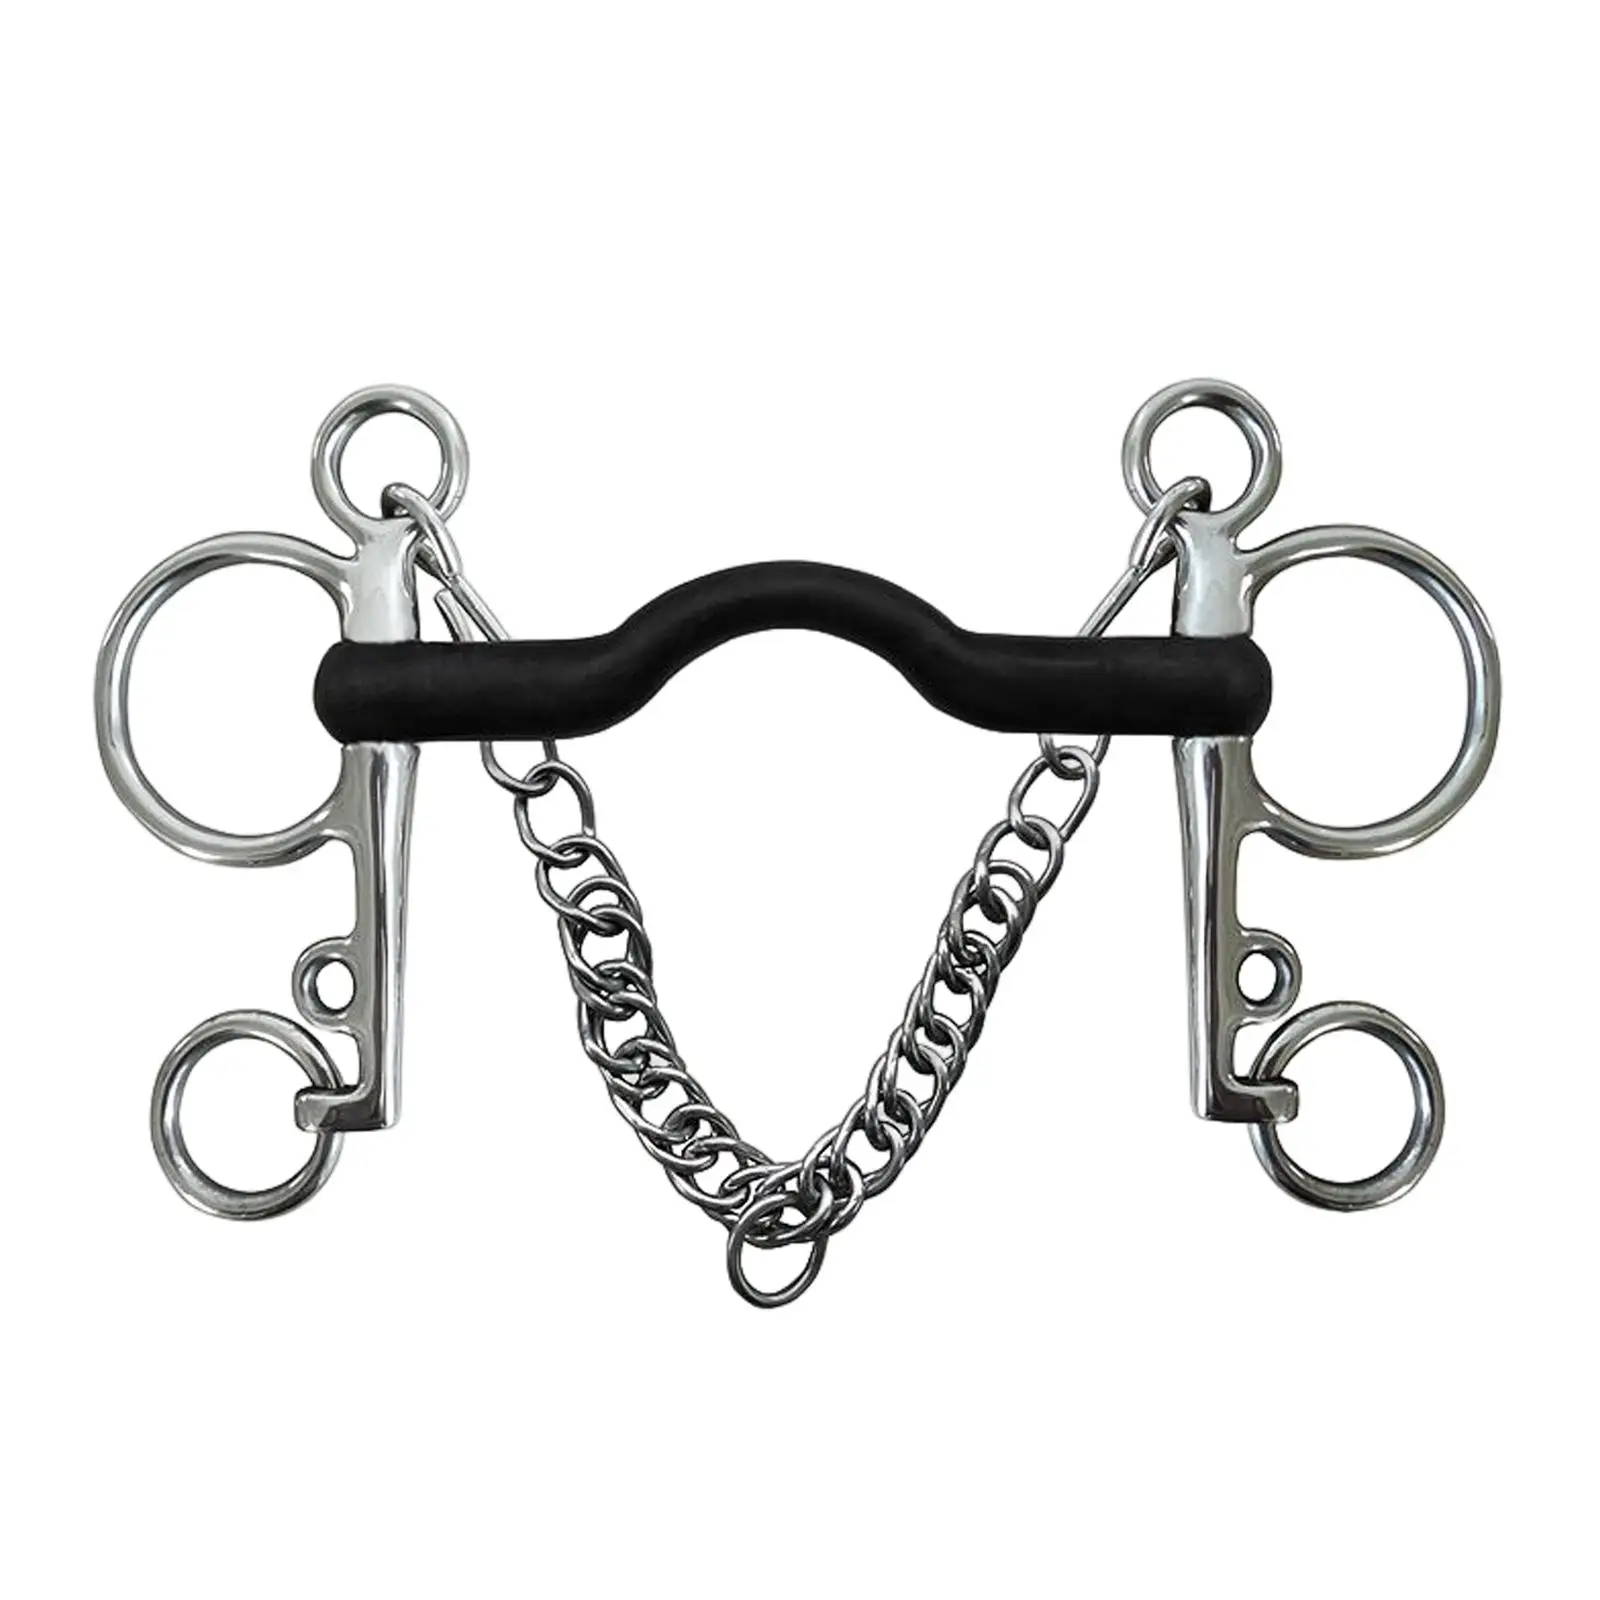 metal Mouth Stainless Steel Cheek with Curb Hooks Chain Horse Gag Bit with Silver Trims for Equestrian Horse Chewing